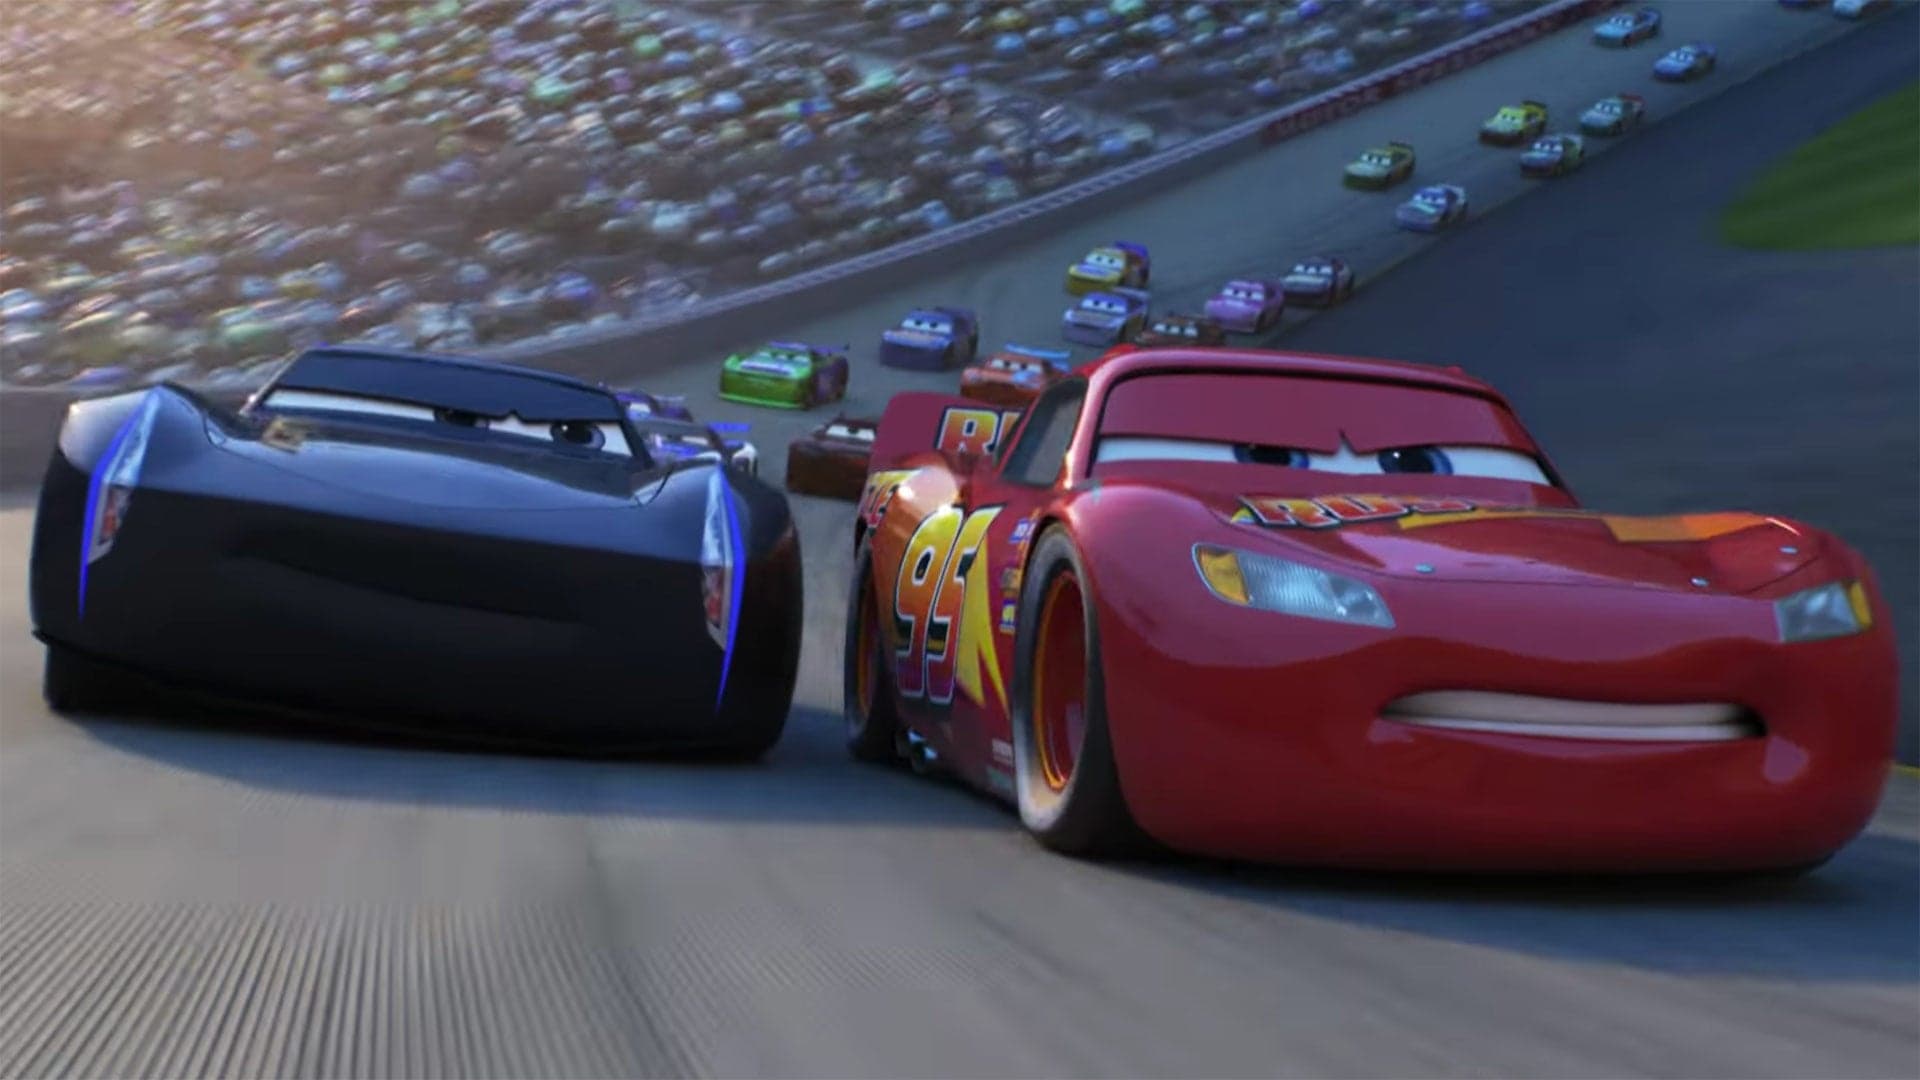 New Cars 3 Trailer Proves Pixar Has Decided to Target The Racing Enthusiast